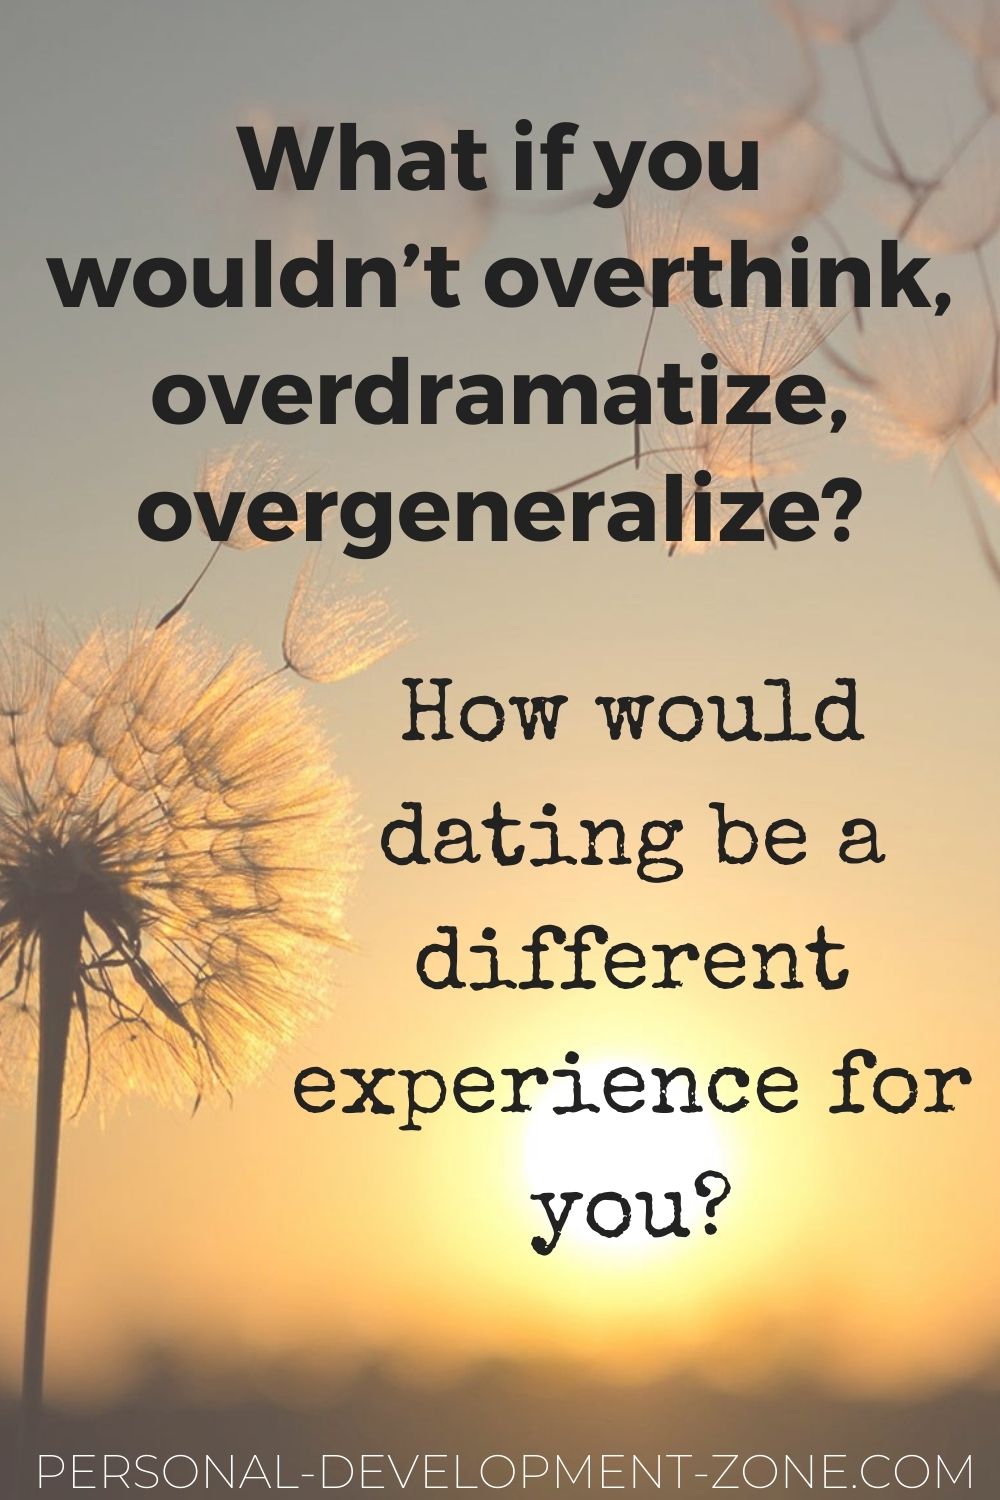 dating quotes what if you wouldn't overthink overdramatize overgeneralize how would dating be a different experience for you